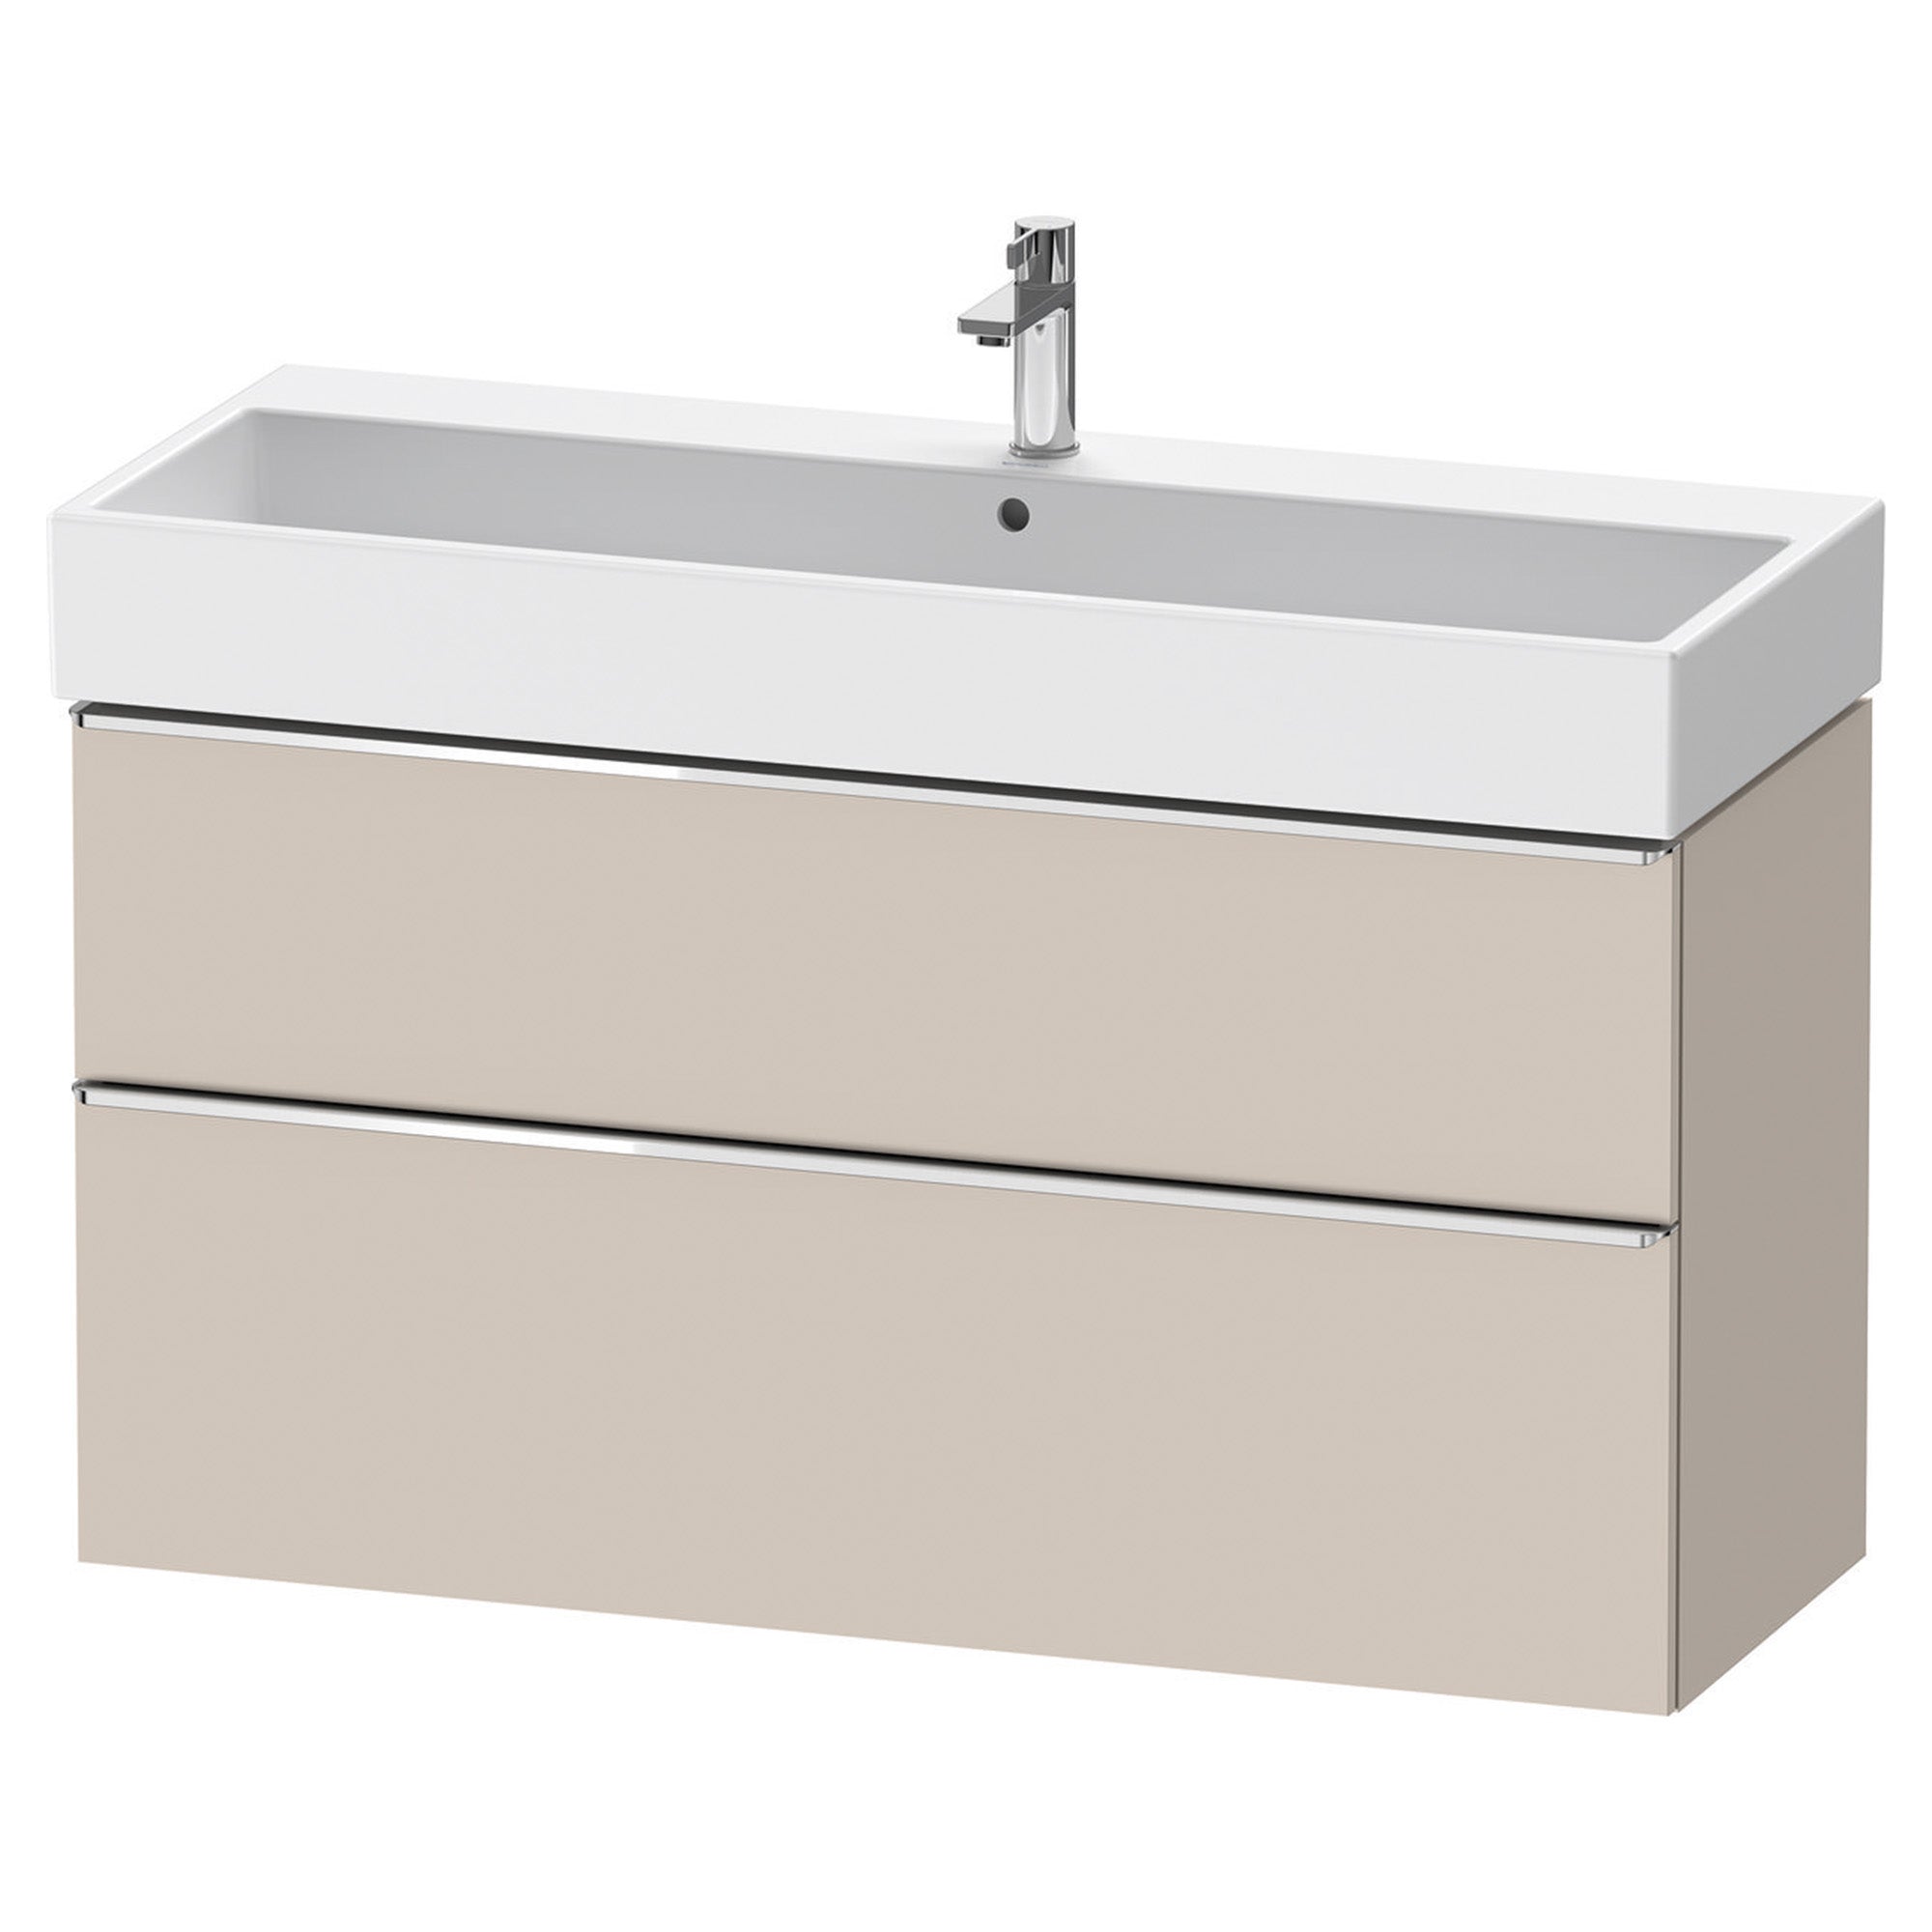 duravit d-neo 1200 wall mounted vanity unit with vero basin taupe chrome handles